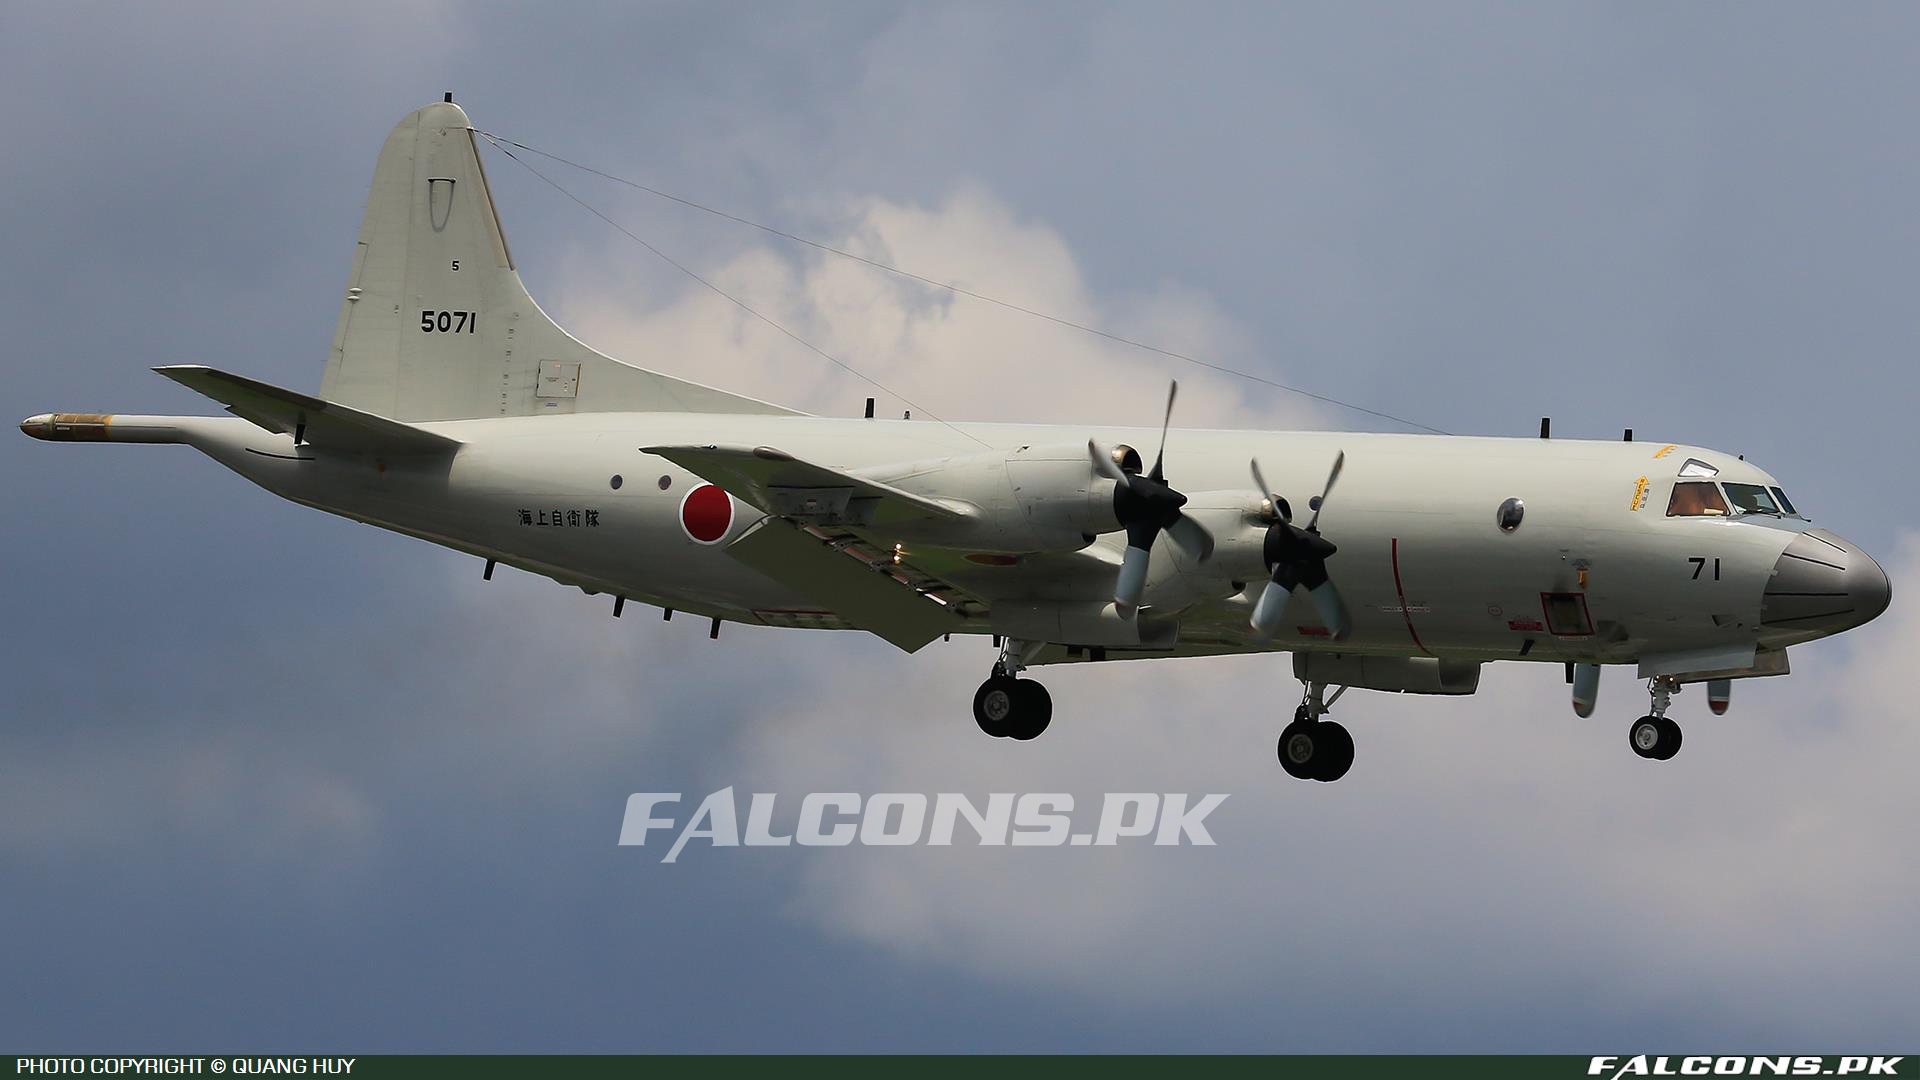 Japan Maritime Self Defence Force Lockheed P-3C Orion, Reg: 5071 (Photo by Quang Huy)